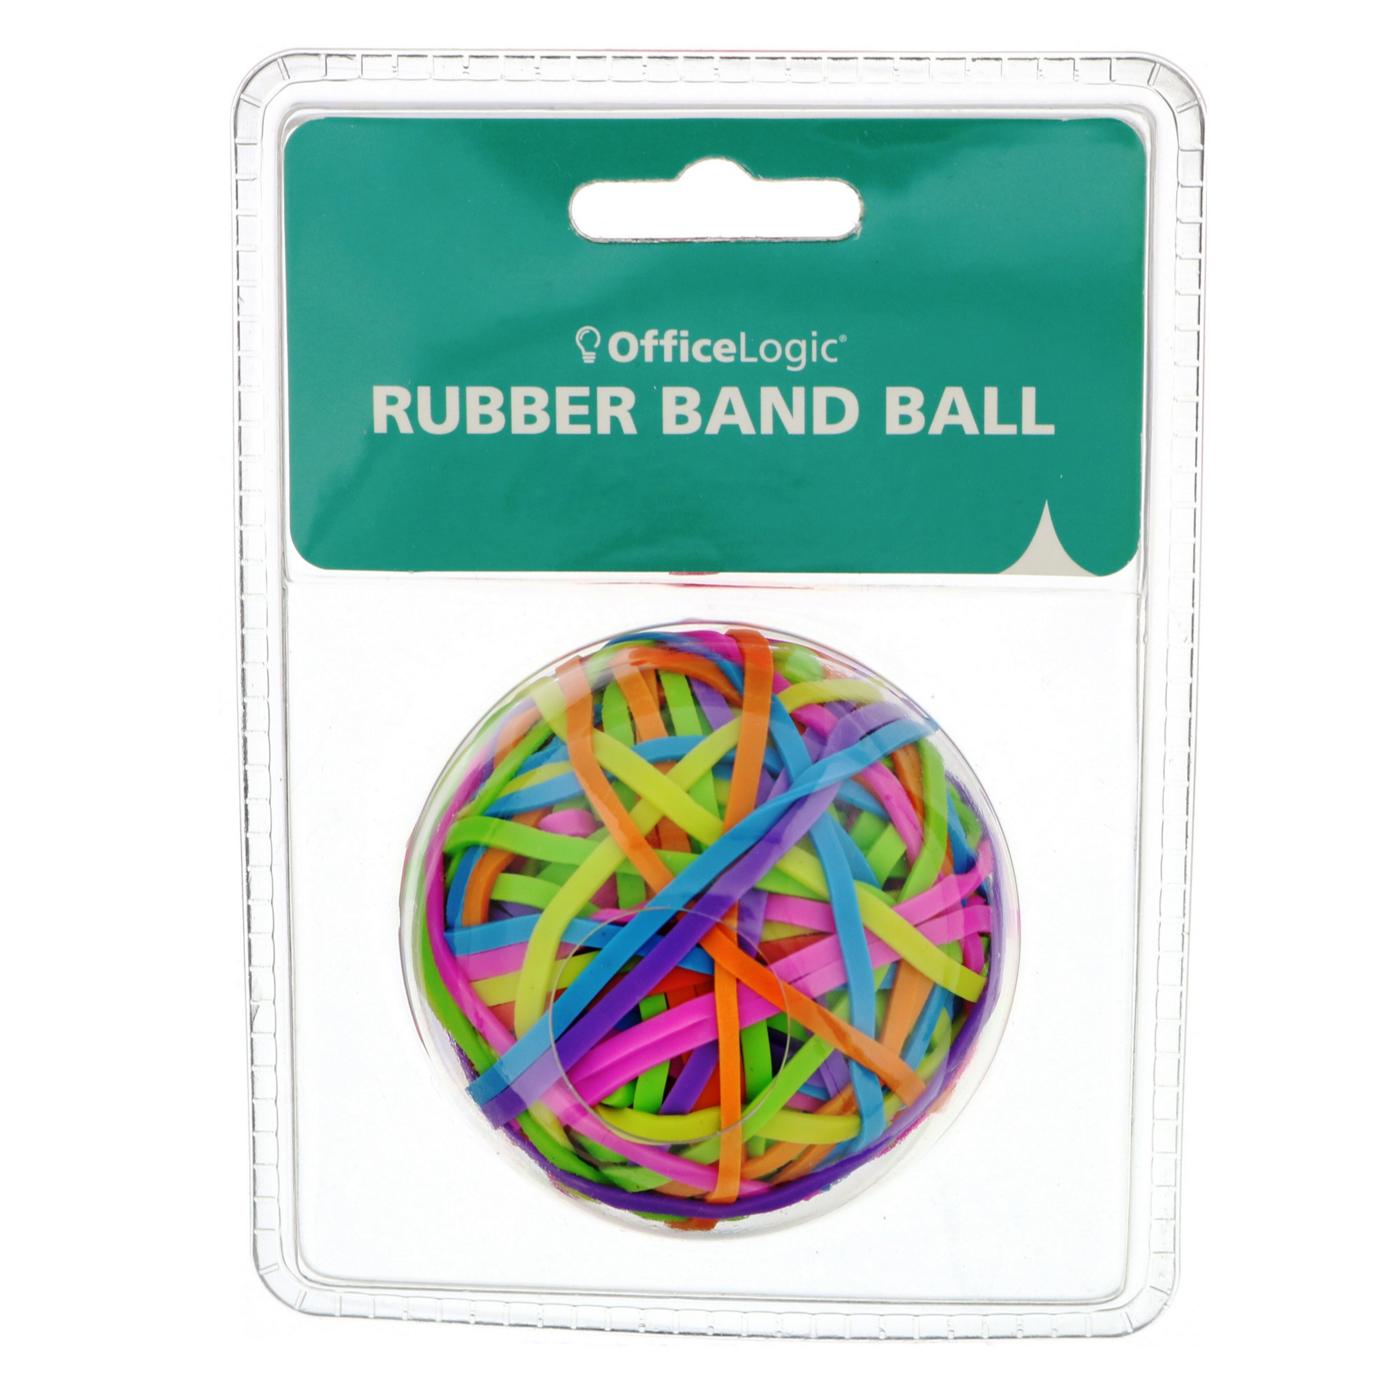 Office Logic Rubber Band Ball; image 2 of 2